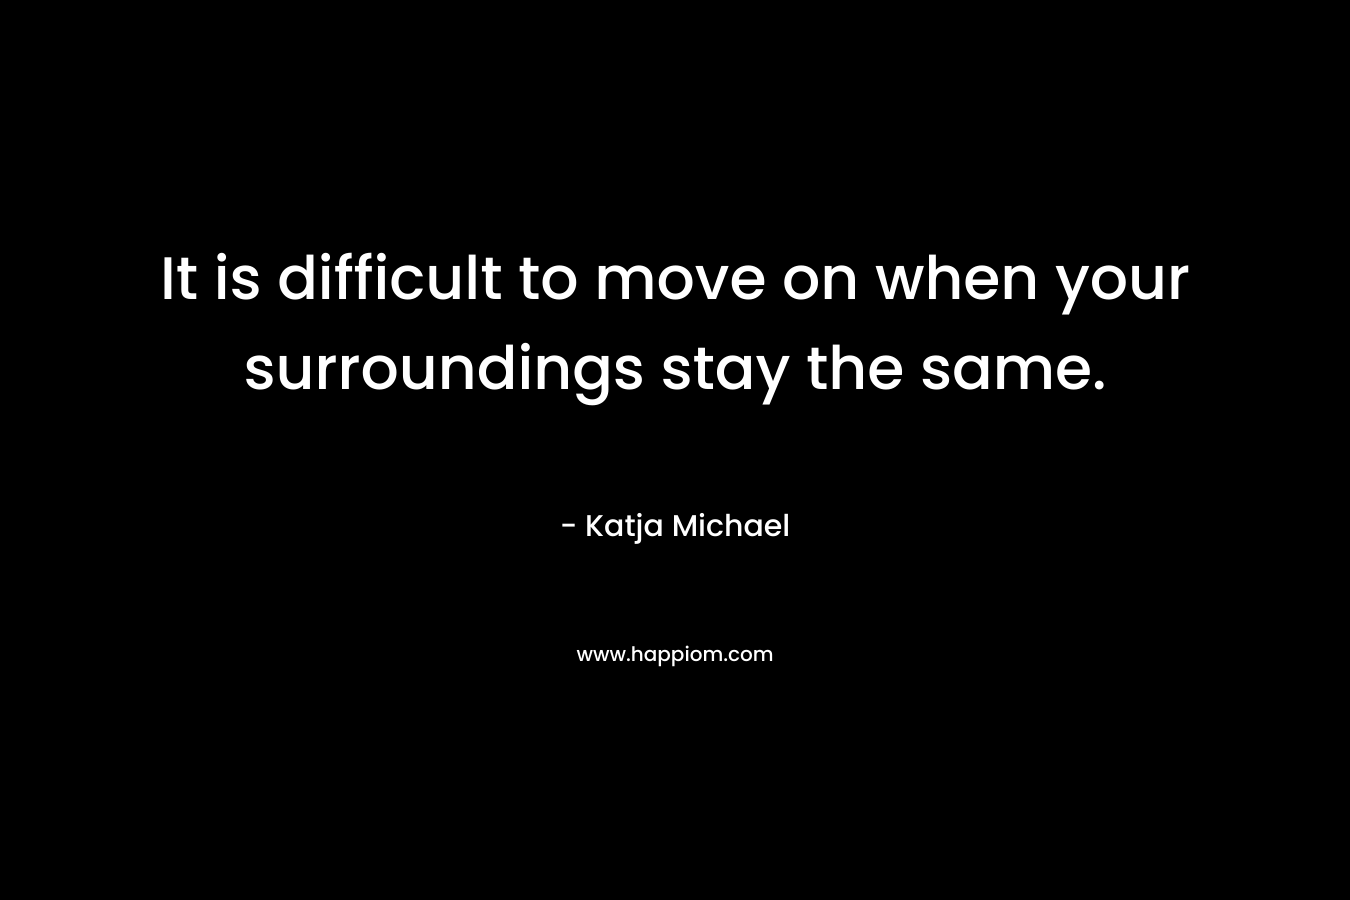 It is difficult to move on when your surroundings stay the same. – Katja Michael